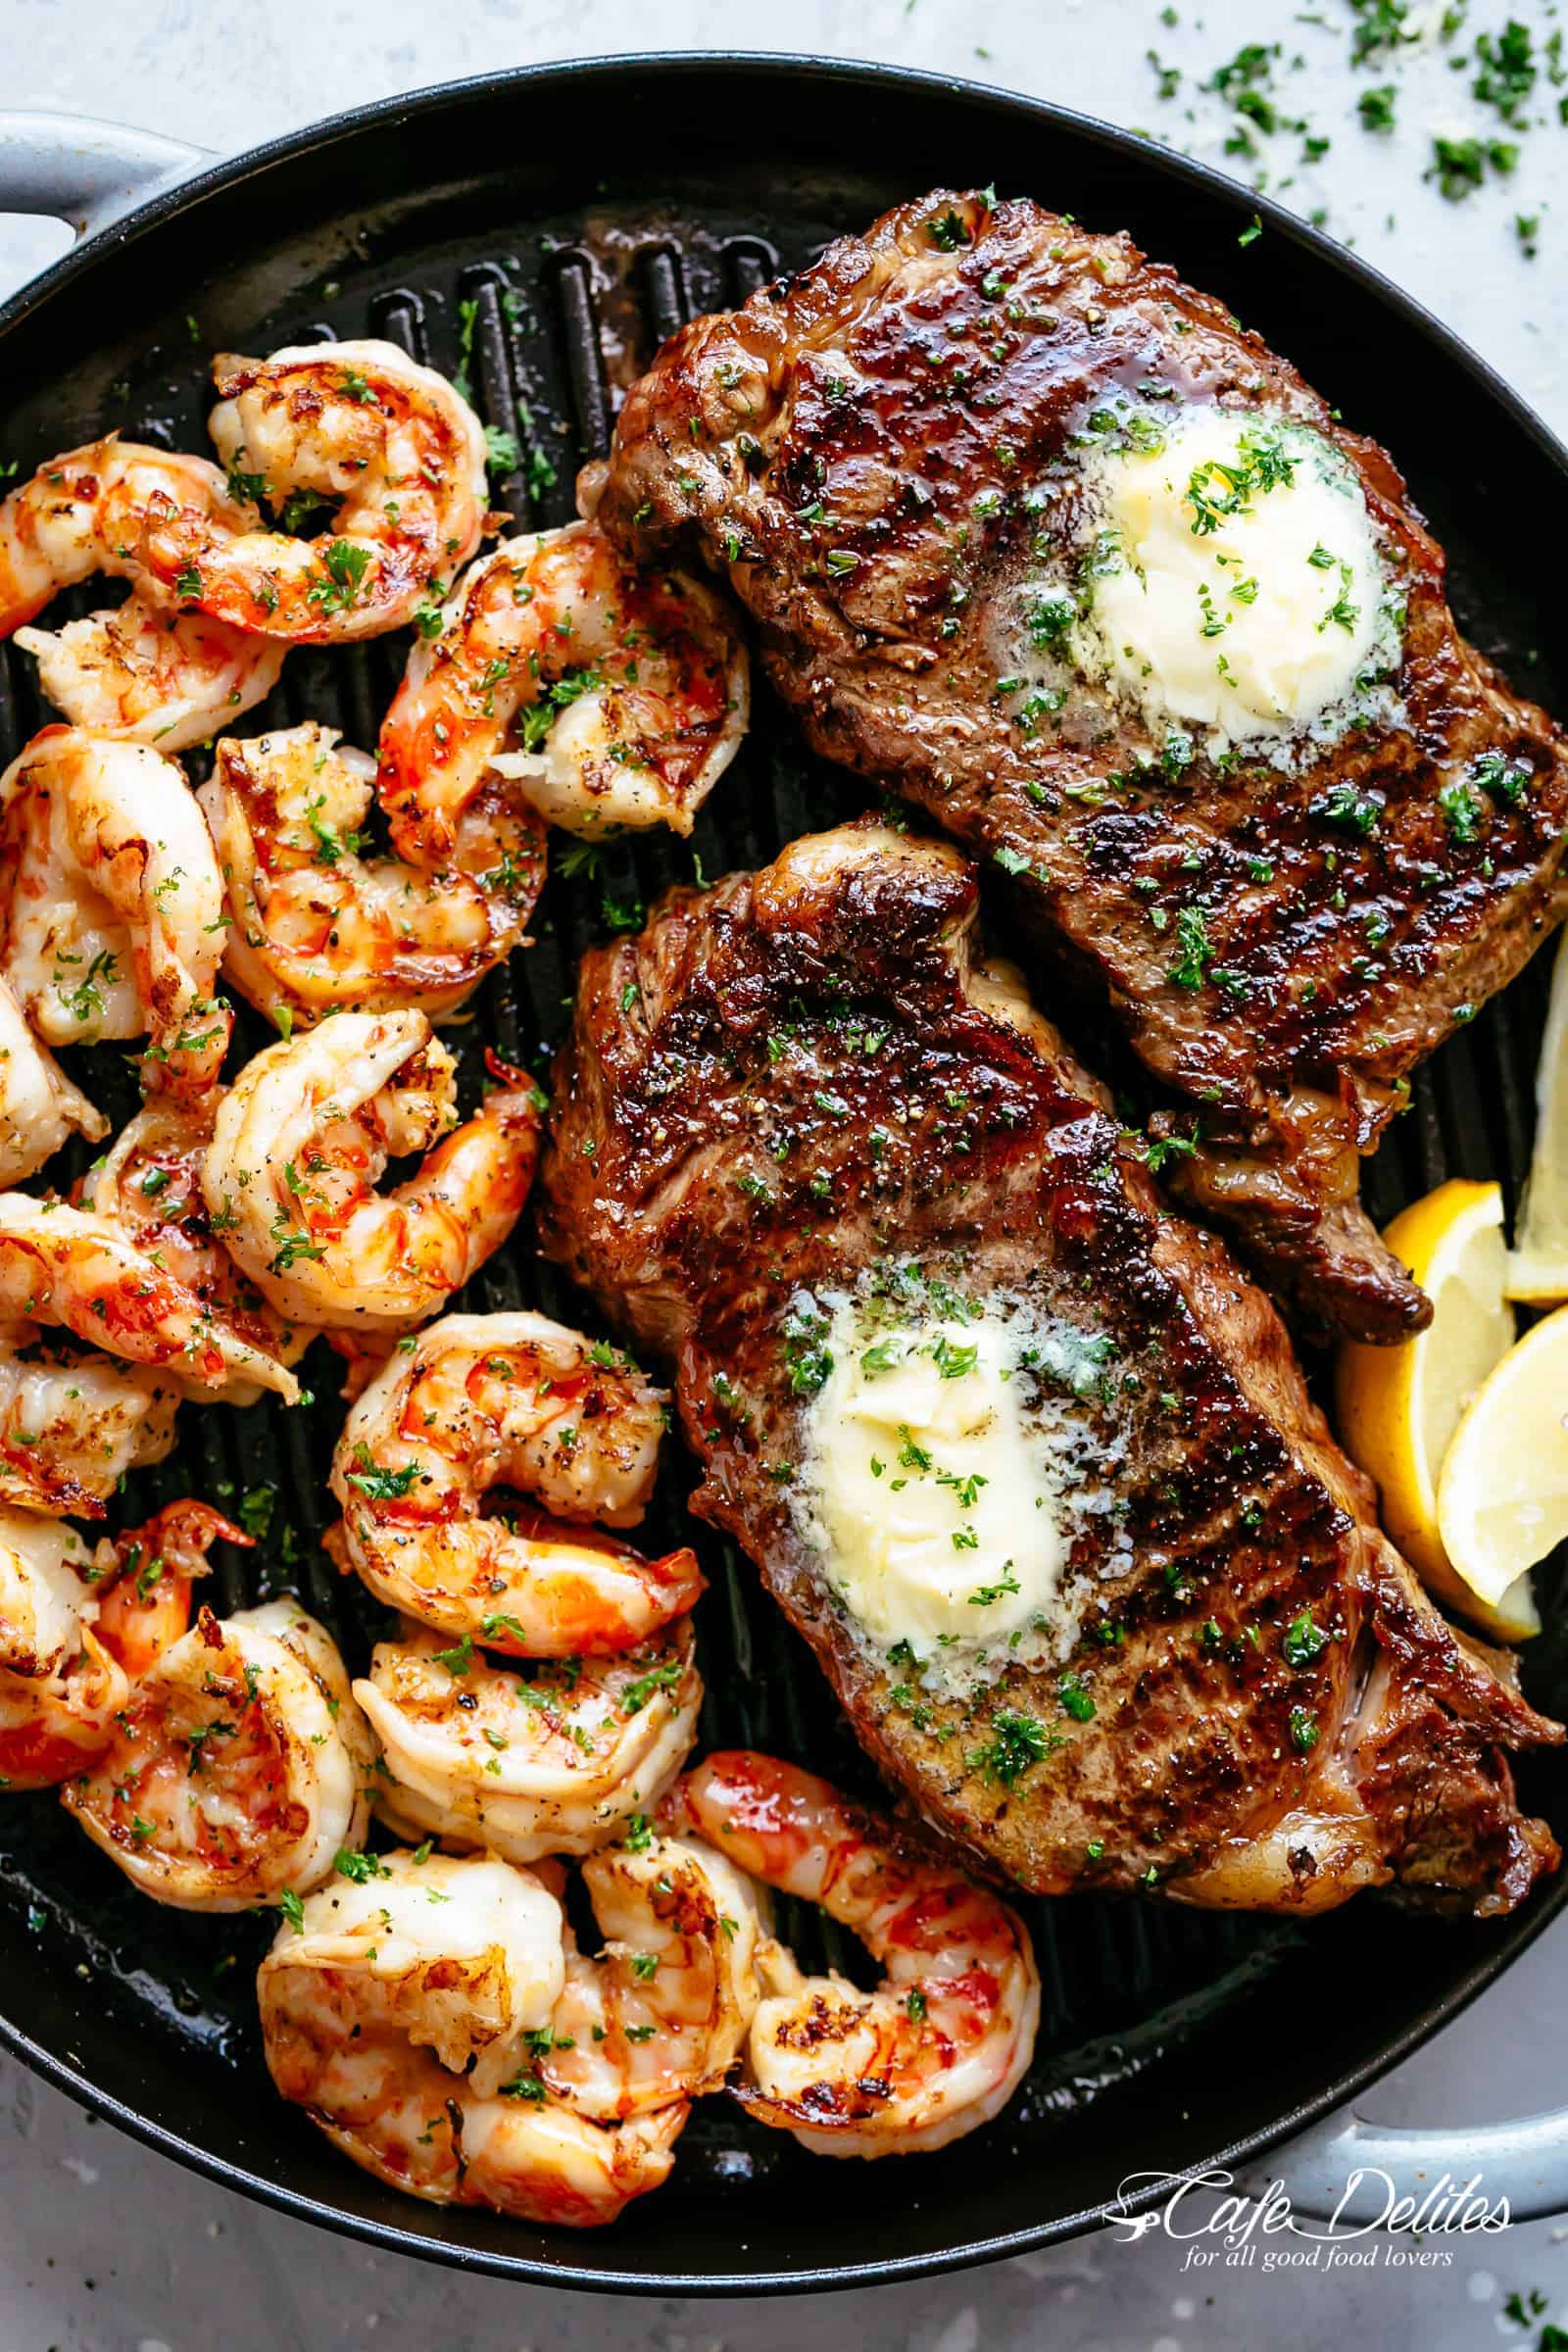 Grilled Steak & Shrimp slathered in garlic butter makes for the BEST steak recipe! A gourmet steak dinner that tastes like something out of a restaurant, ready and on the table in less than 15 minutes | cafedelites.com